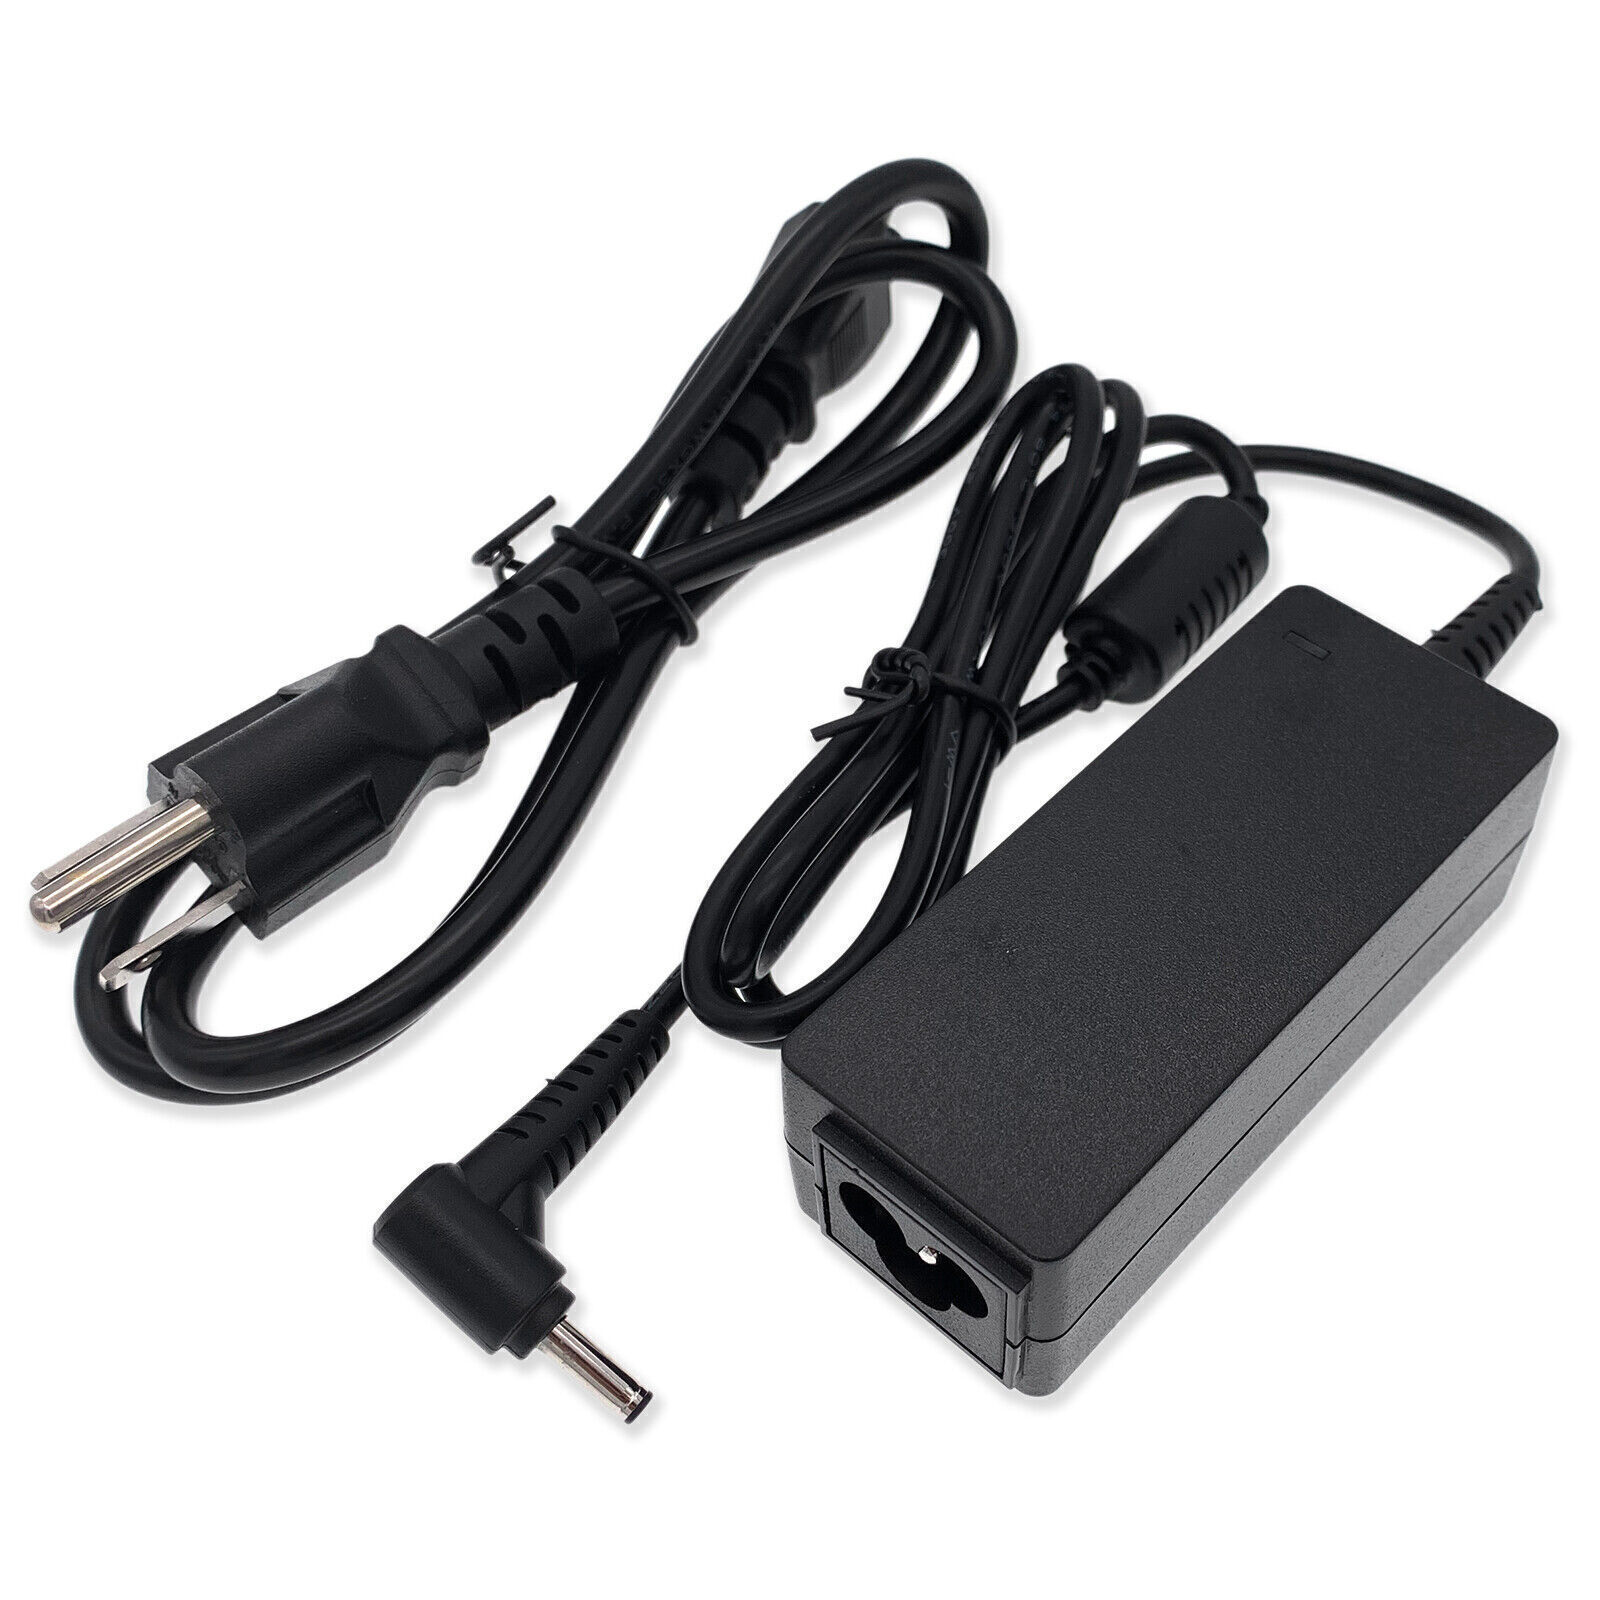 19V 1.75A 33W AC Power Adapter Charger for ASUS MODEL: AD2131320 Supply Cord New